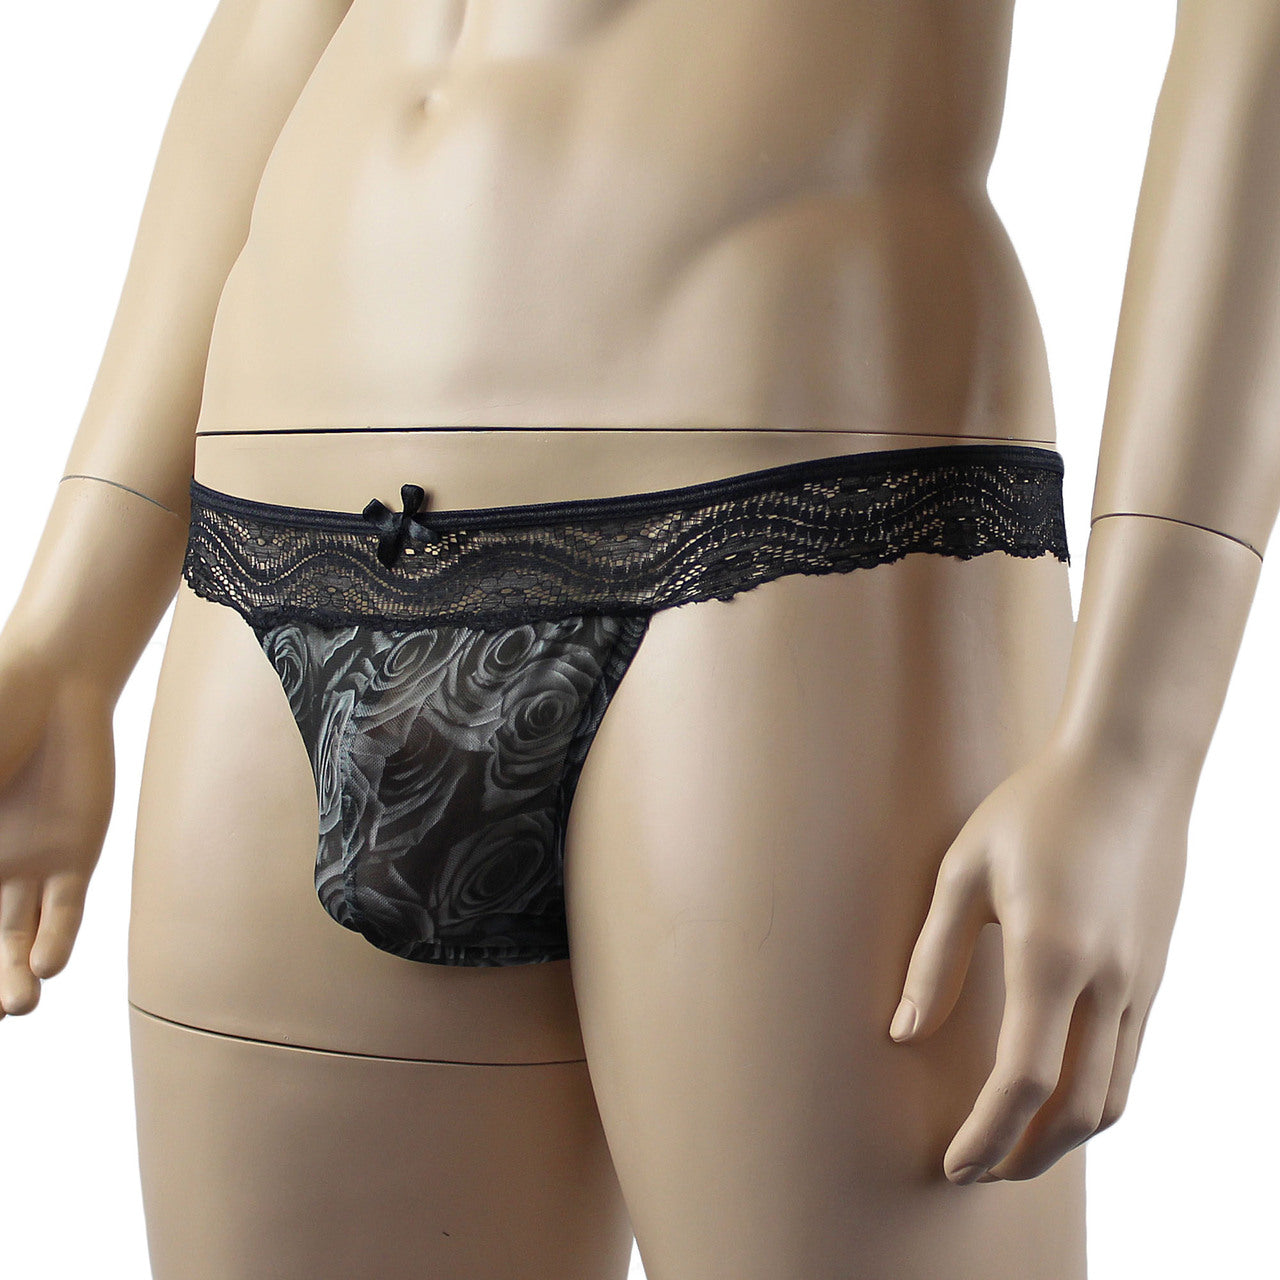 Mens Roses Thong, Sexy Sheer Lingerie Underwear Grey and Black lace